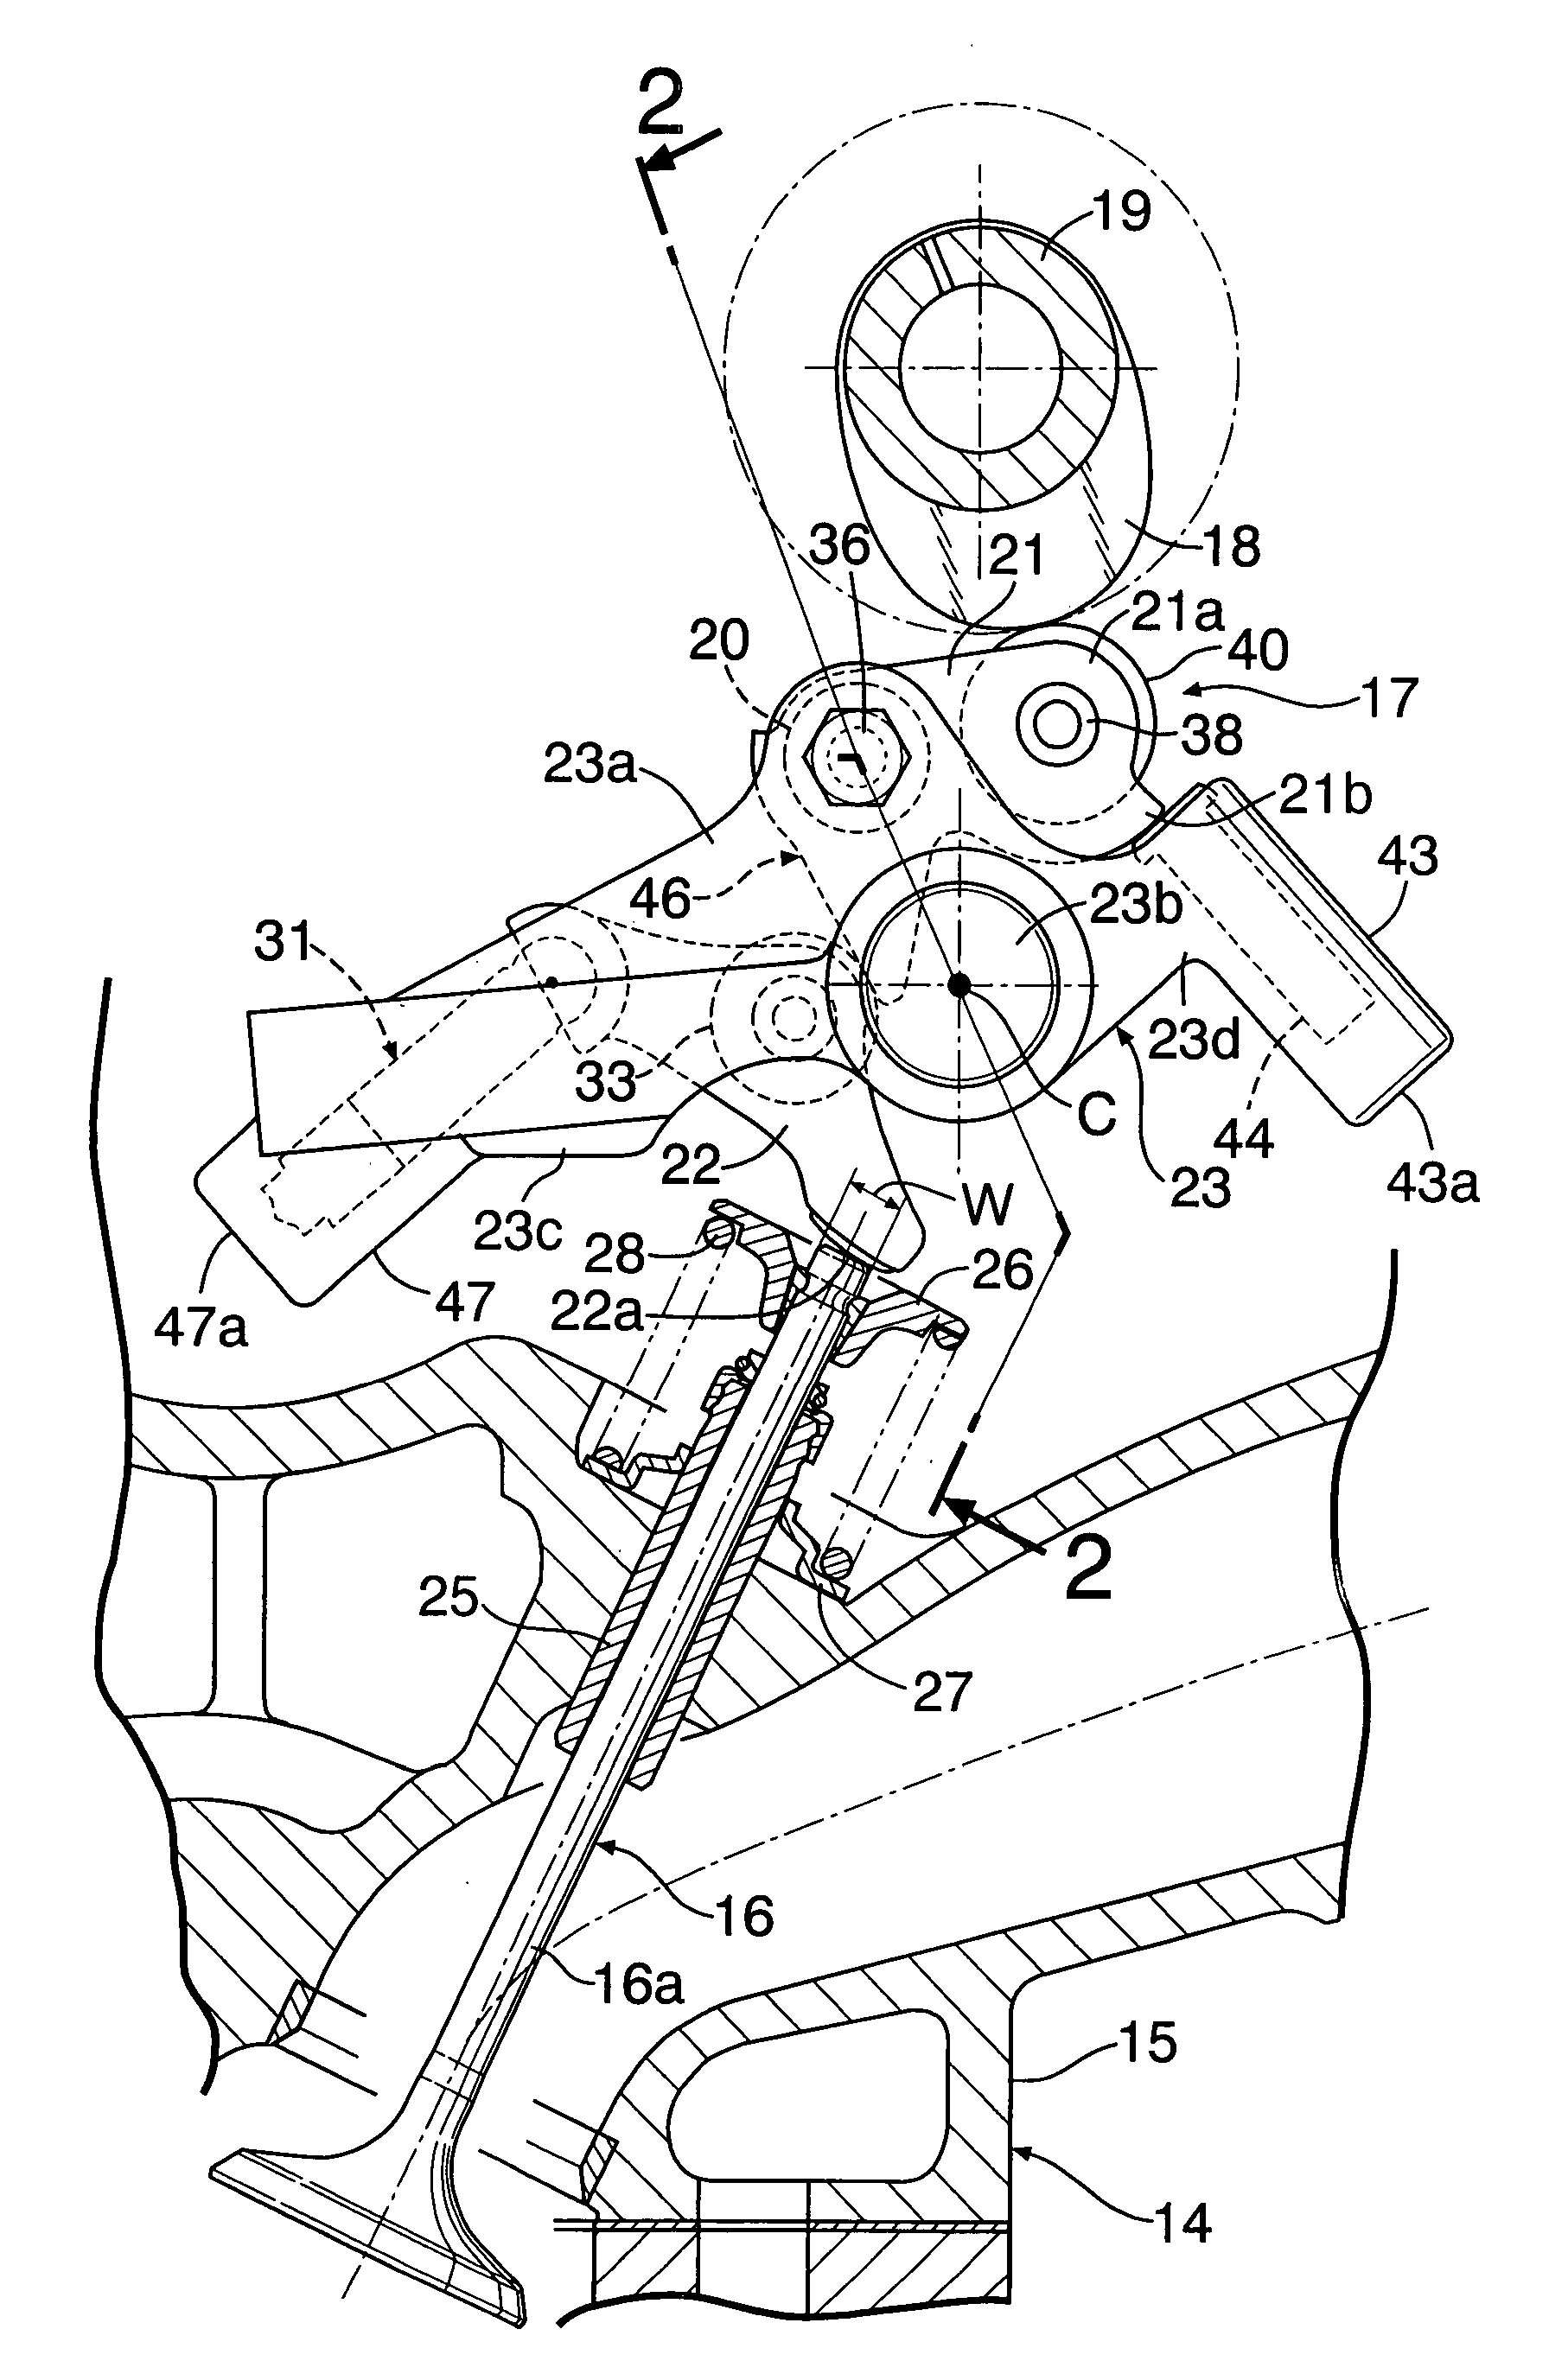 Default device of actuator for variable lift valve operating mechanism